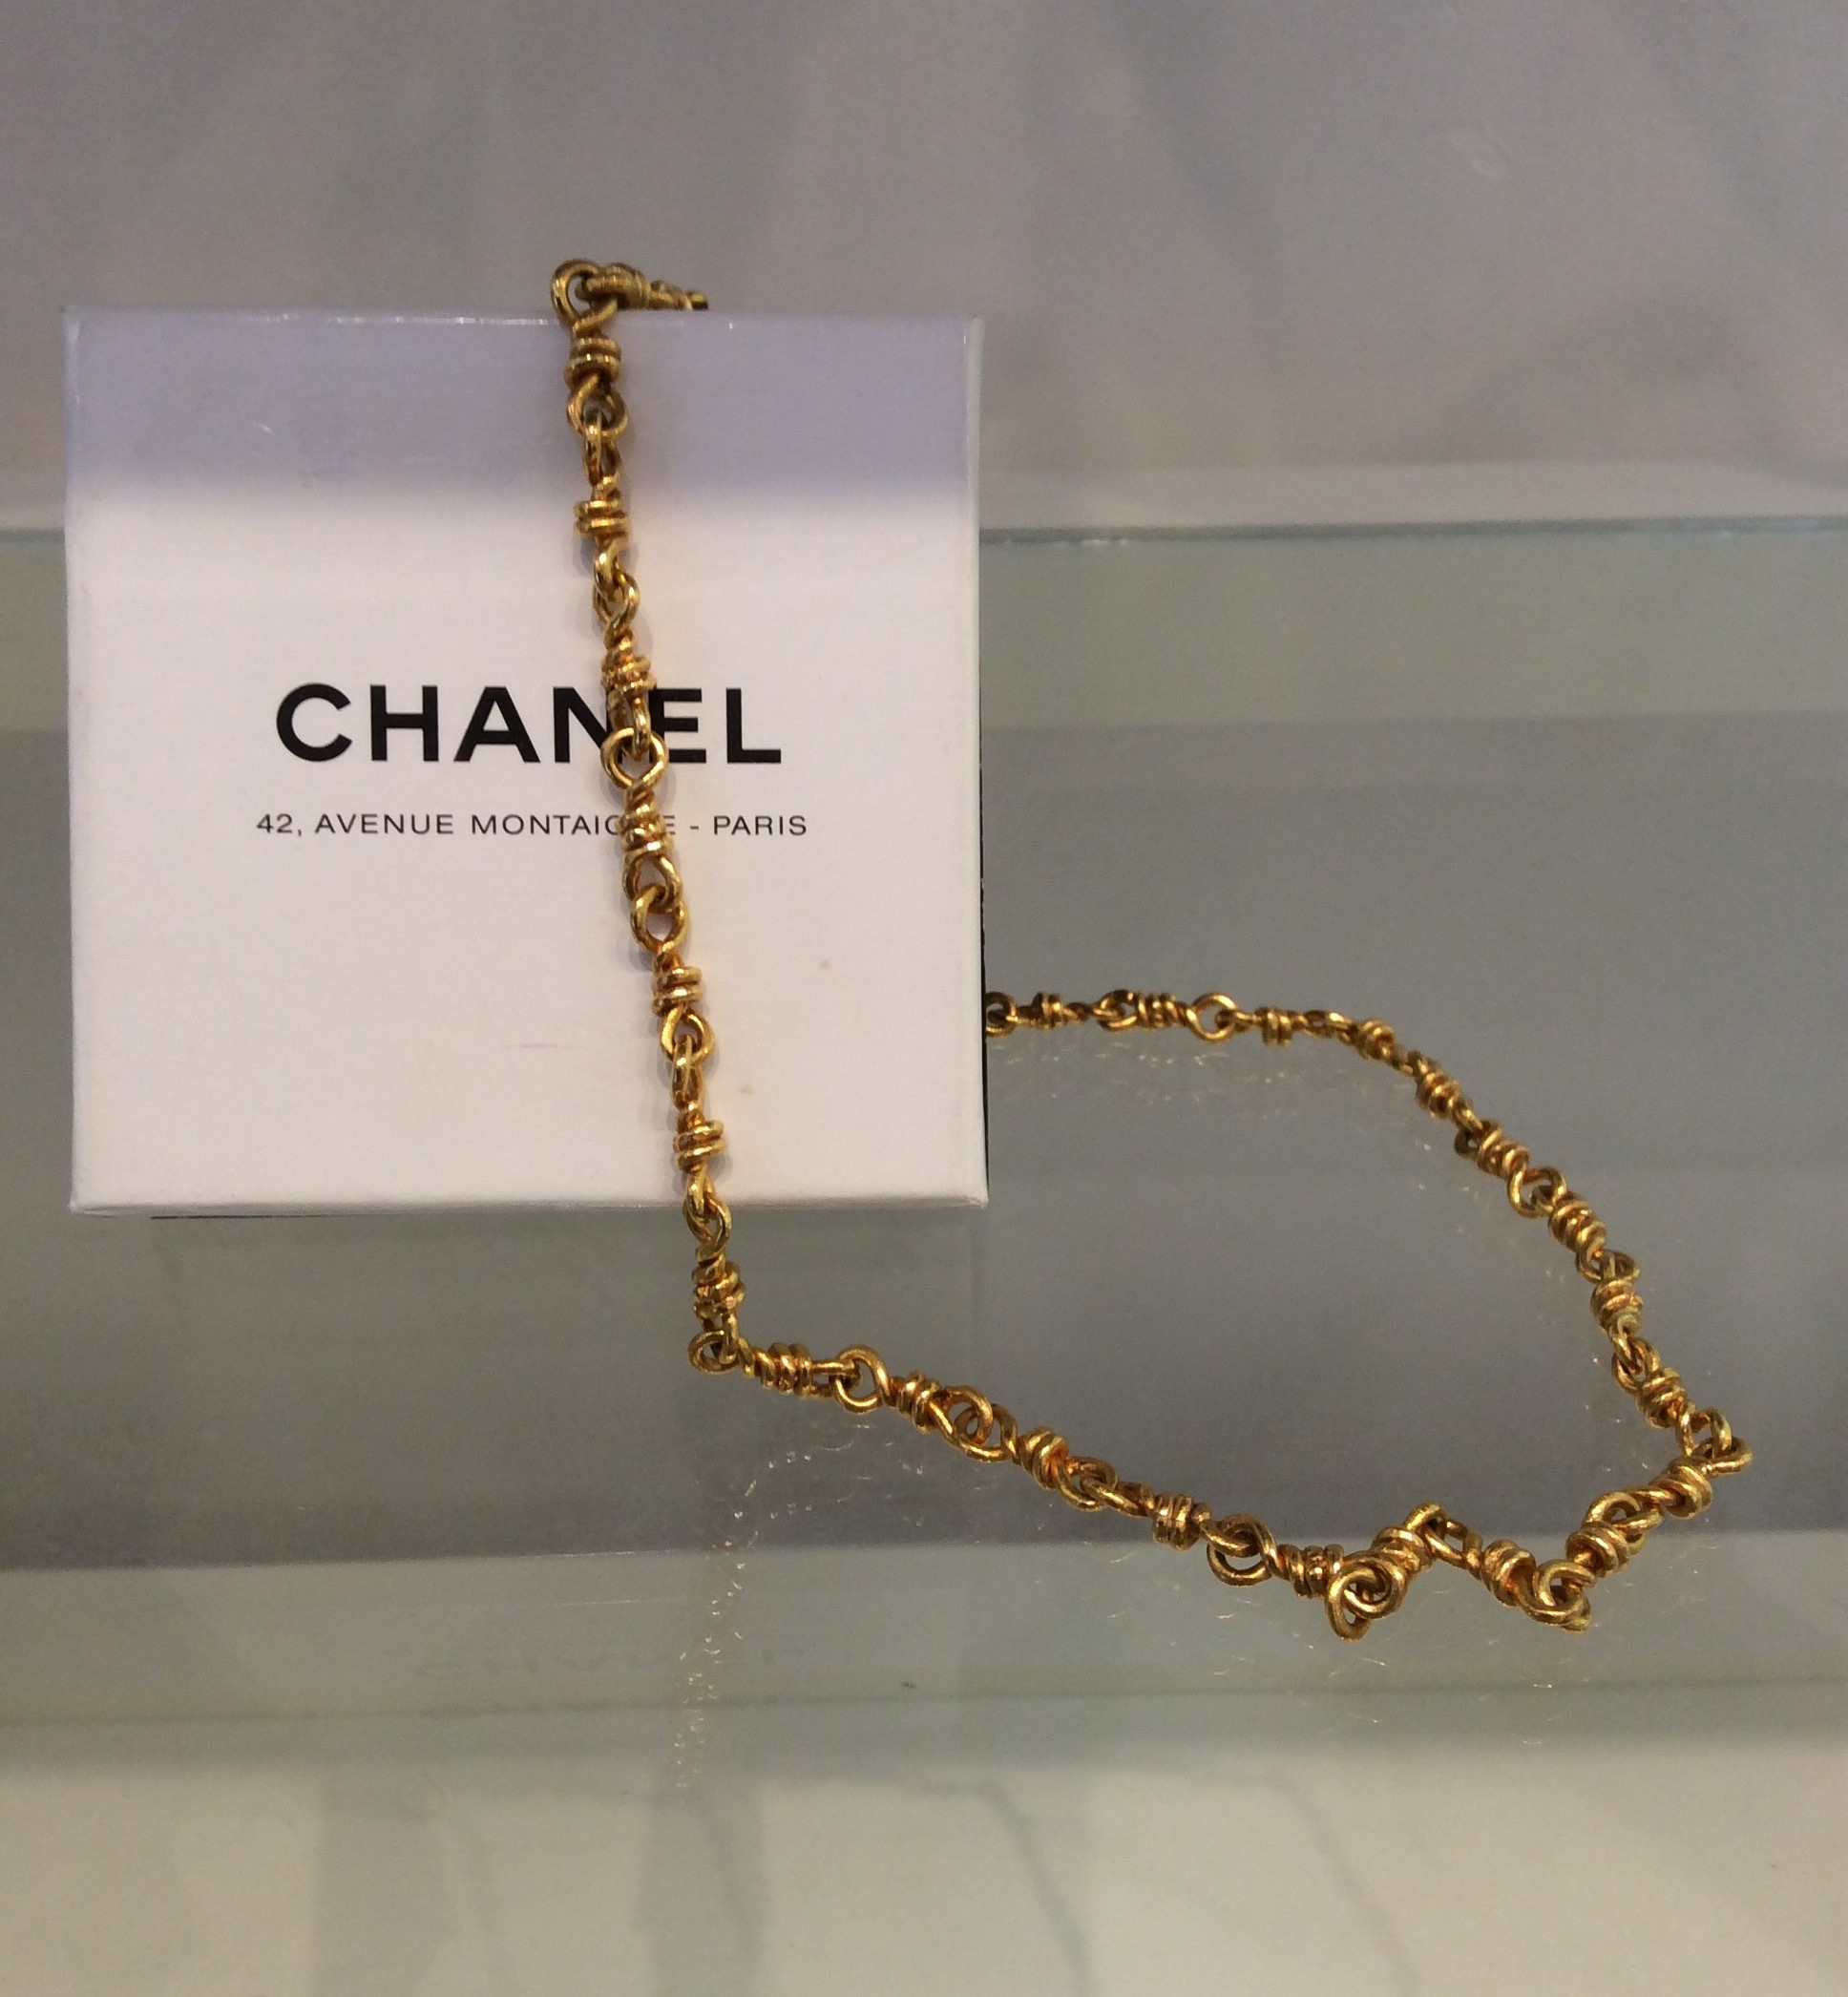 Where to buy vintage Chanel jewelry in Paris